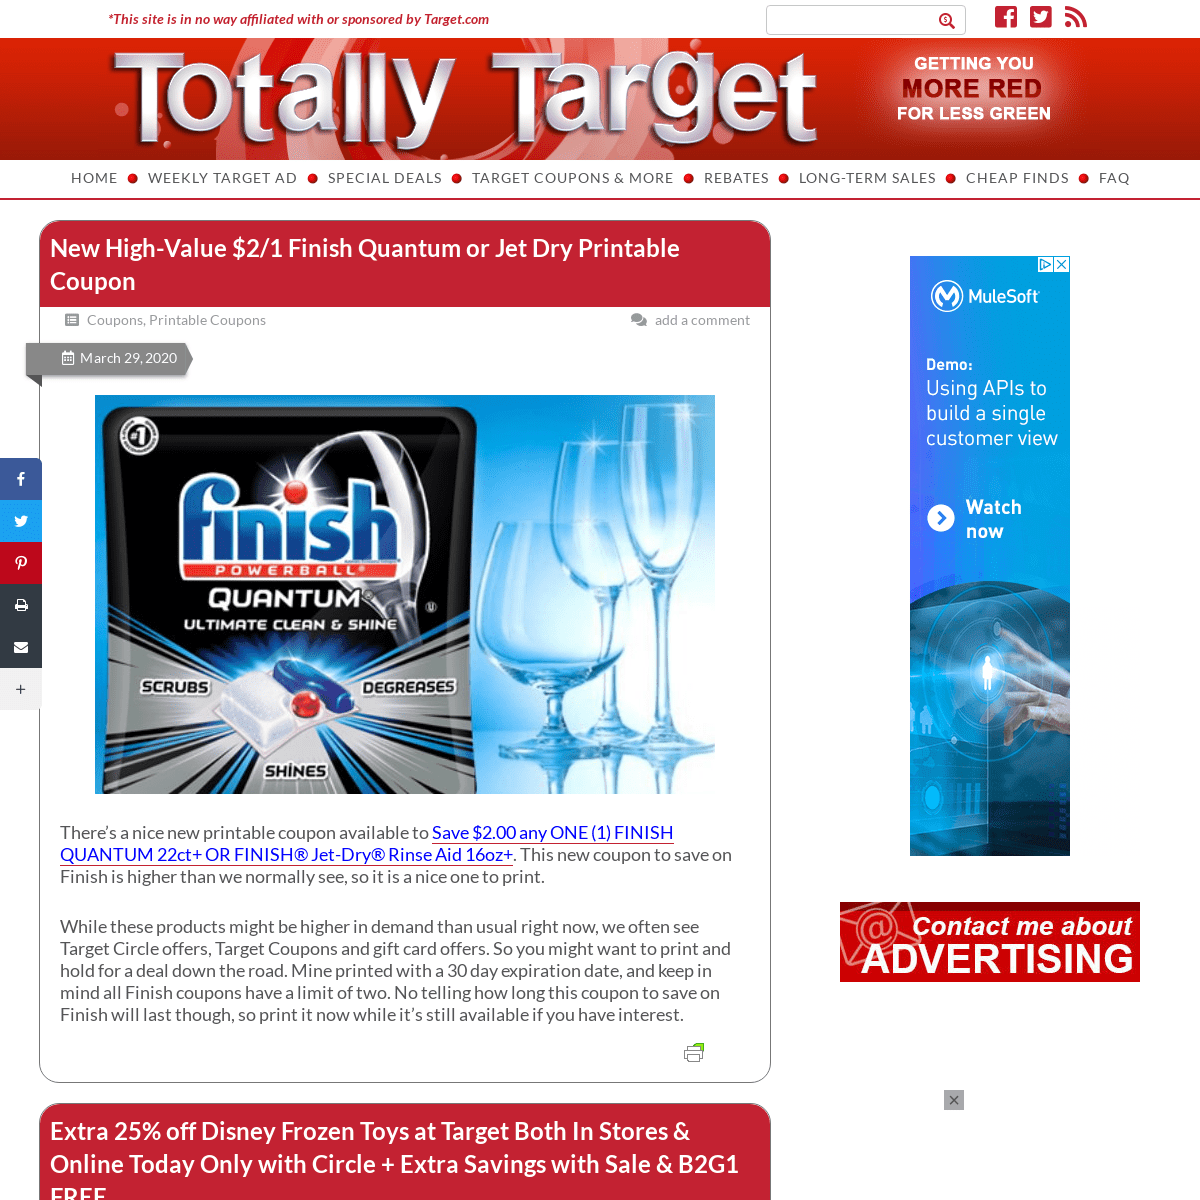 A complete backup of totallytarget.com